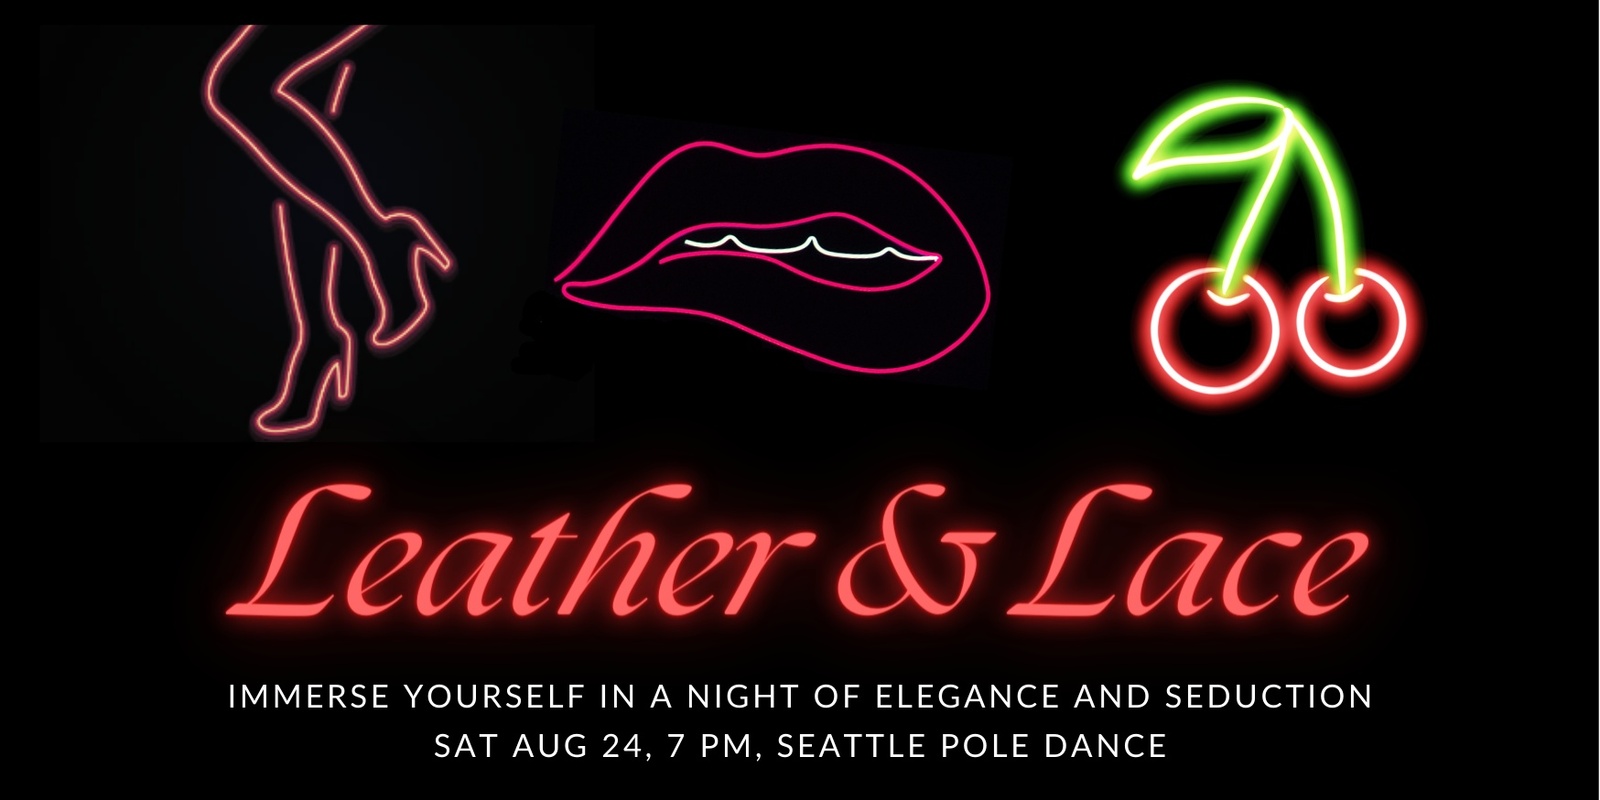 Banner image for Leather & Lace (Saturday, Aug 24)